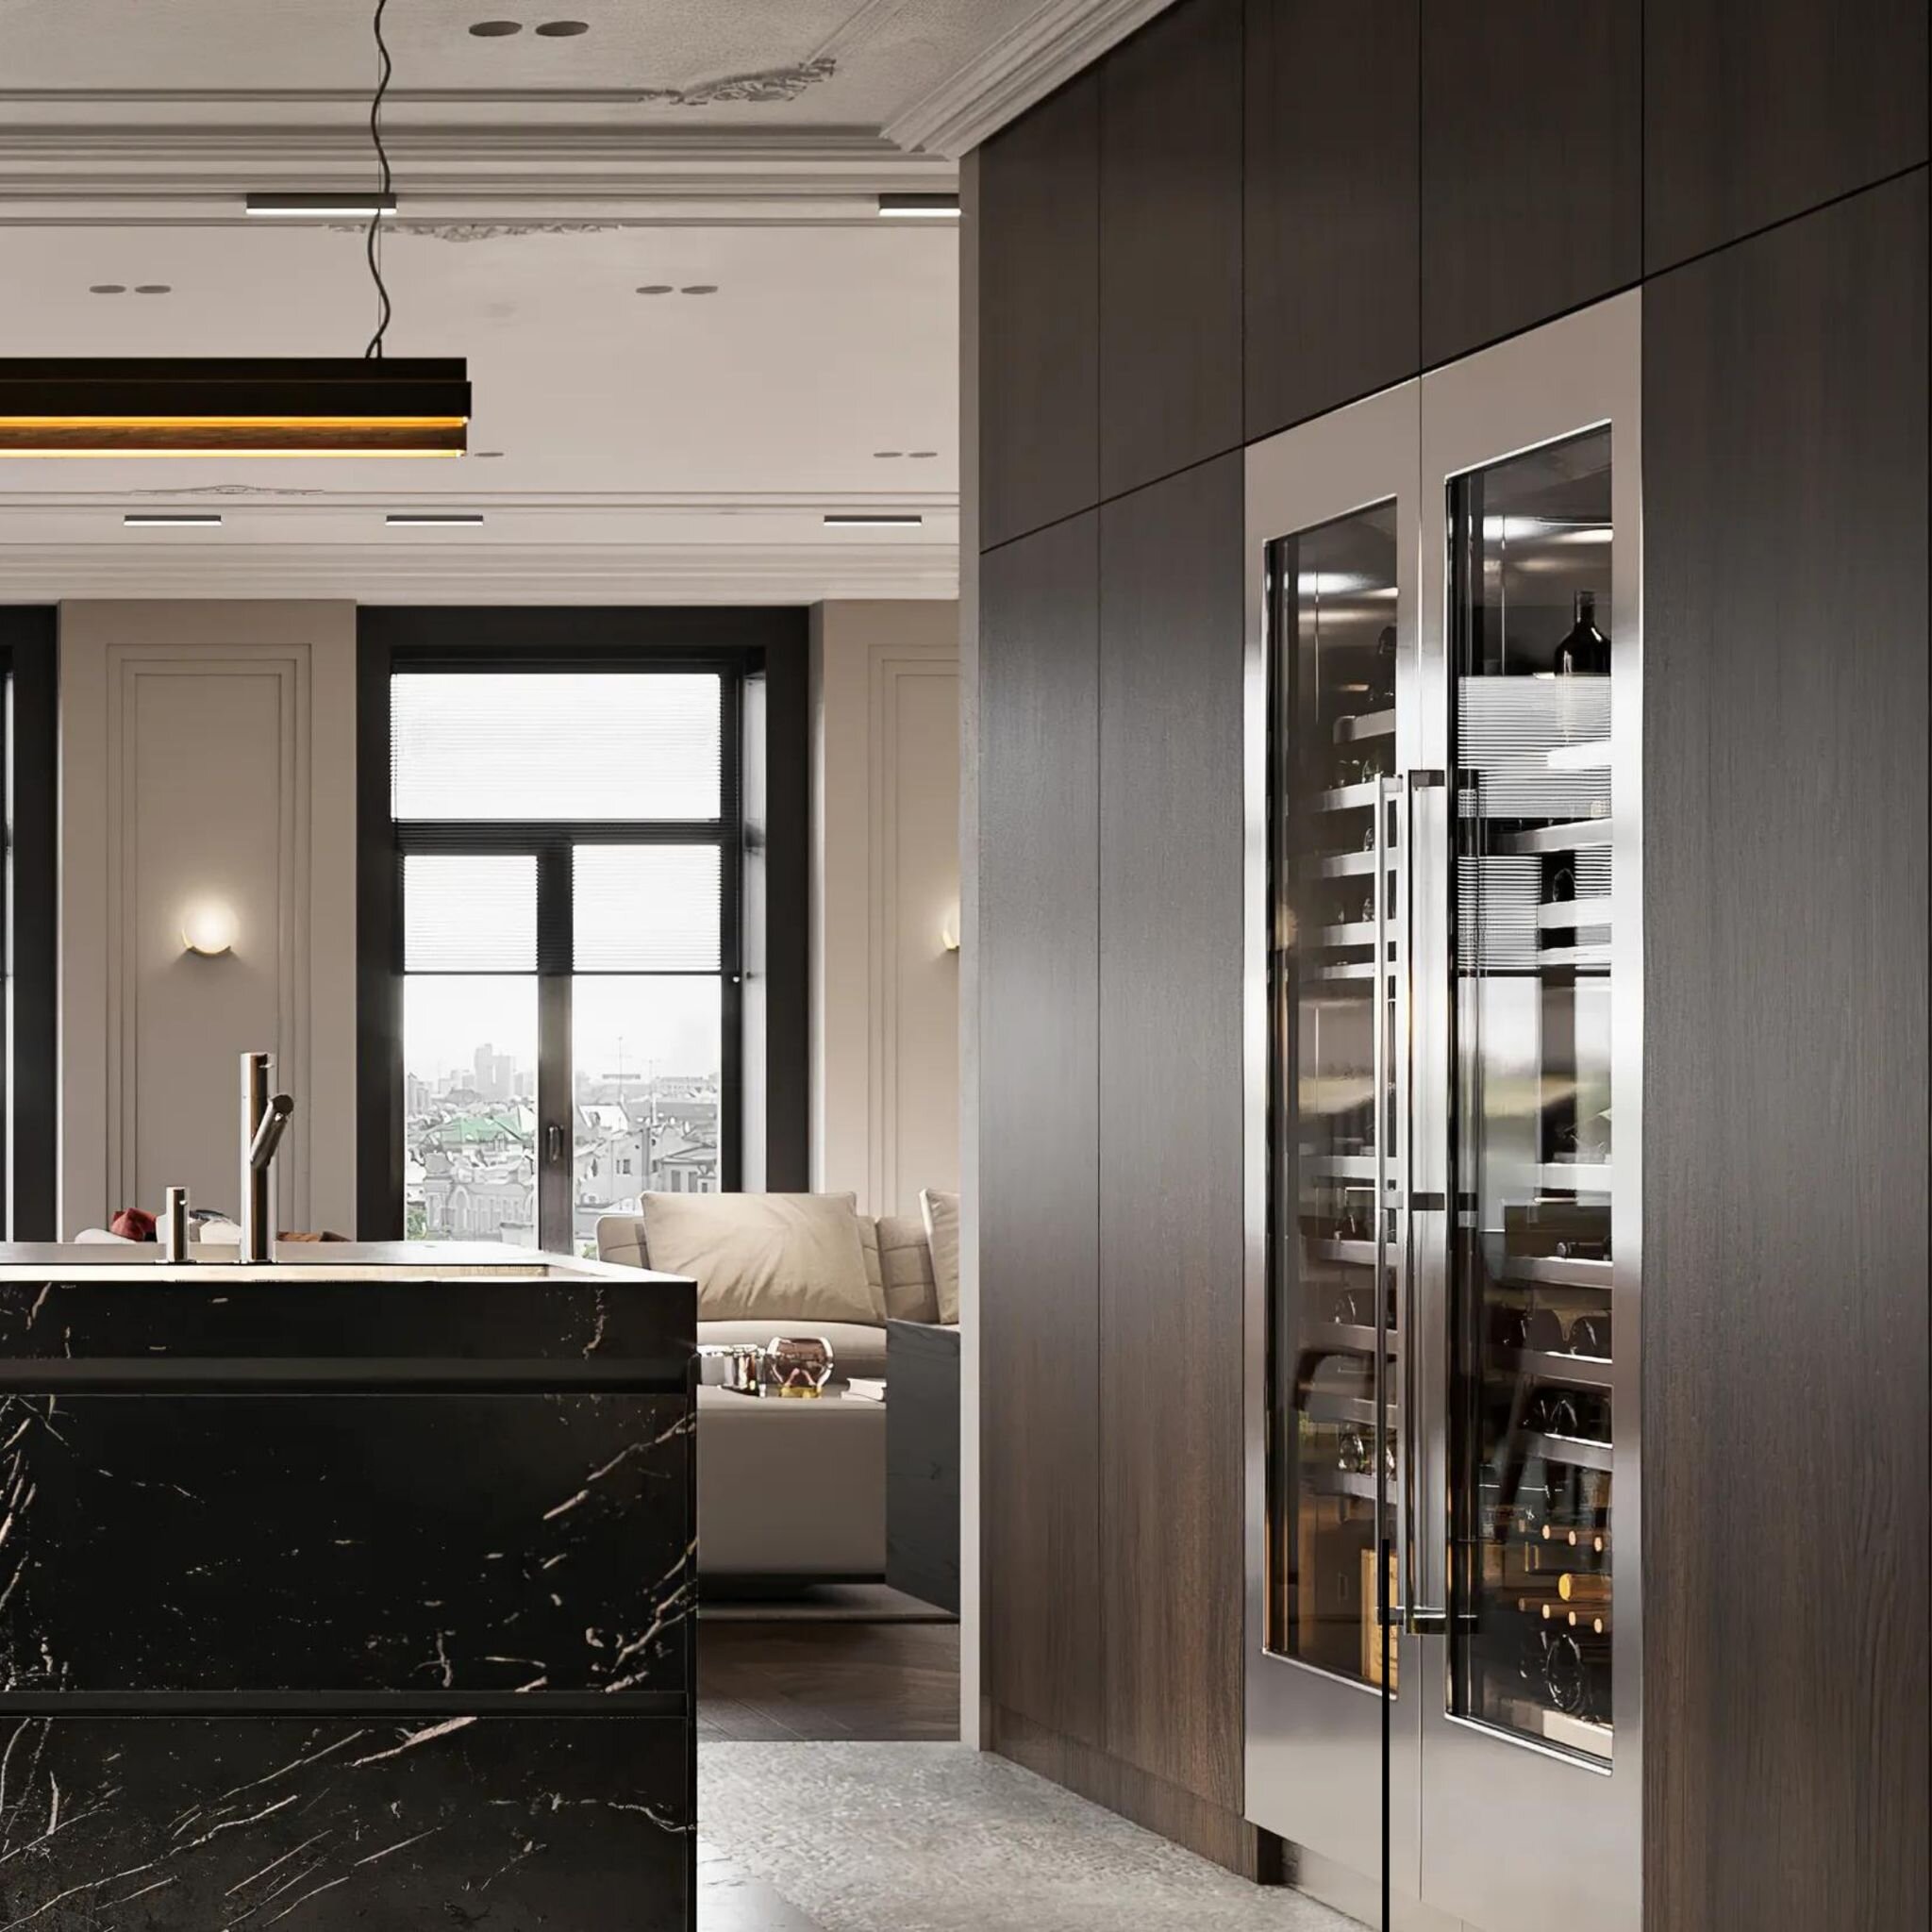 Transform your kitchen into a masterpiece with the unmatched style and innovation of Gaggenau appliances, expertly integrated into a custom-designed space by Giotto &amp; Mendini. 

𝐖𝐞 𝐦𝐚𝐤𝐞 𝐥𝐮𝐱𝐮𝐫𝐲 𝐦𝐞𝐞𝐭 𝐜𝐨𝐧𝐯𝐞𝐧𝐢𝐞𝐧𝐜𝐞...

From 